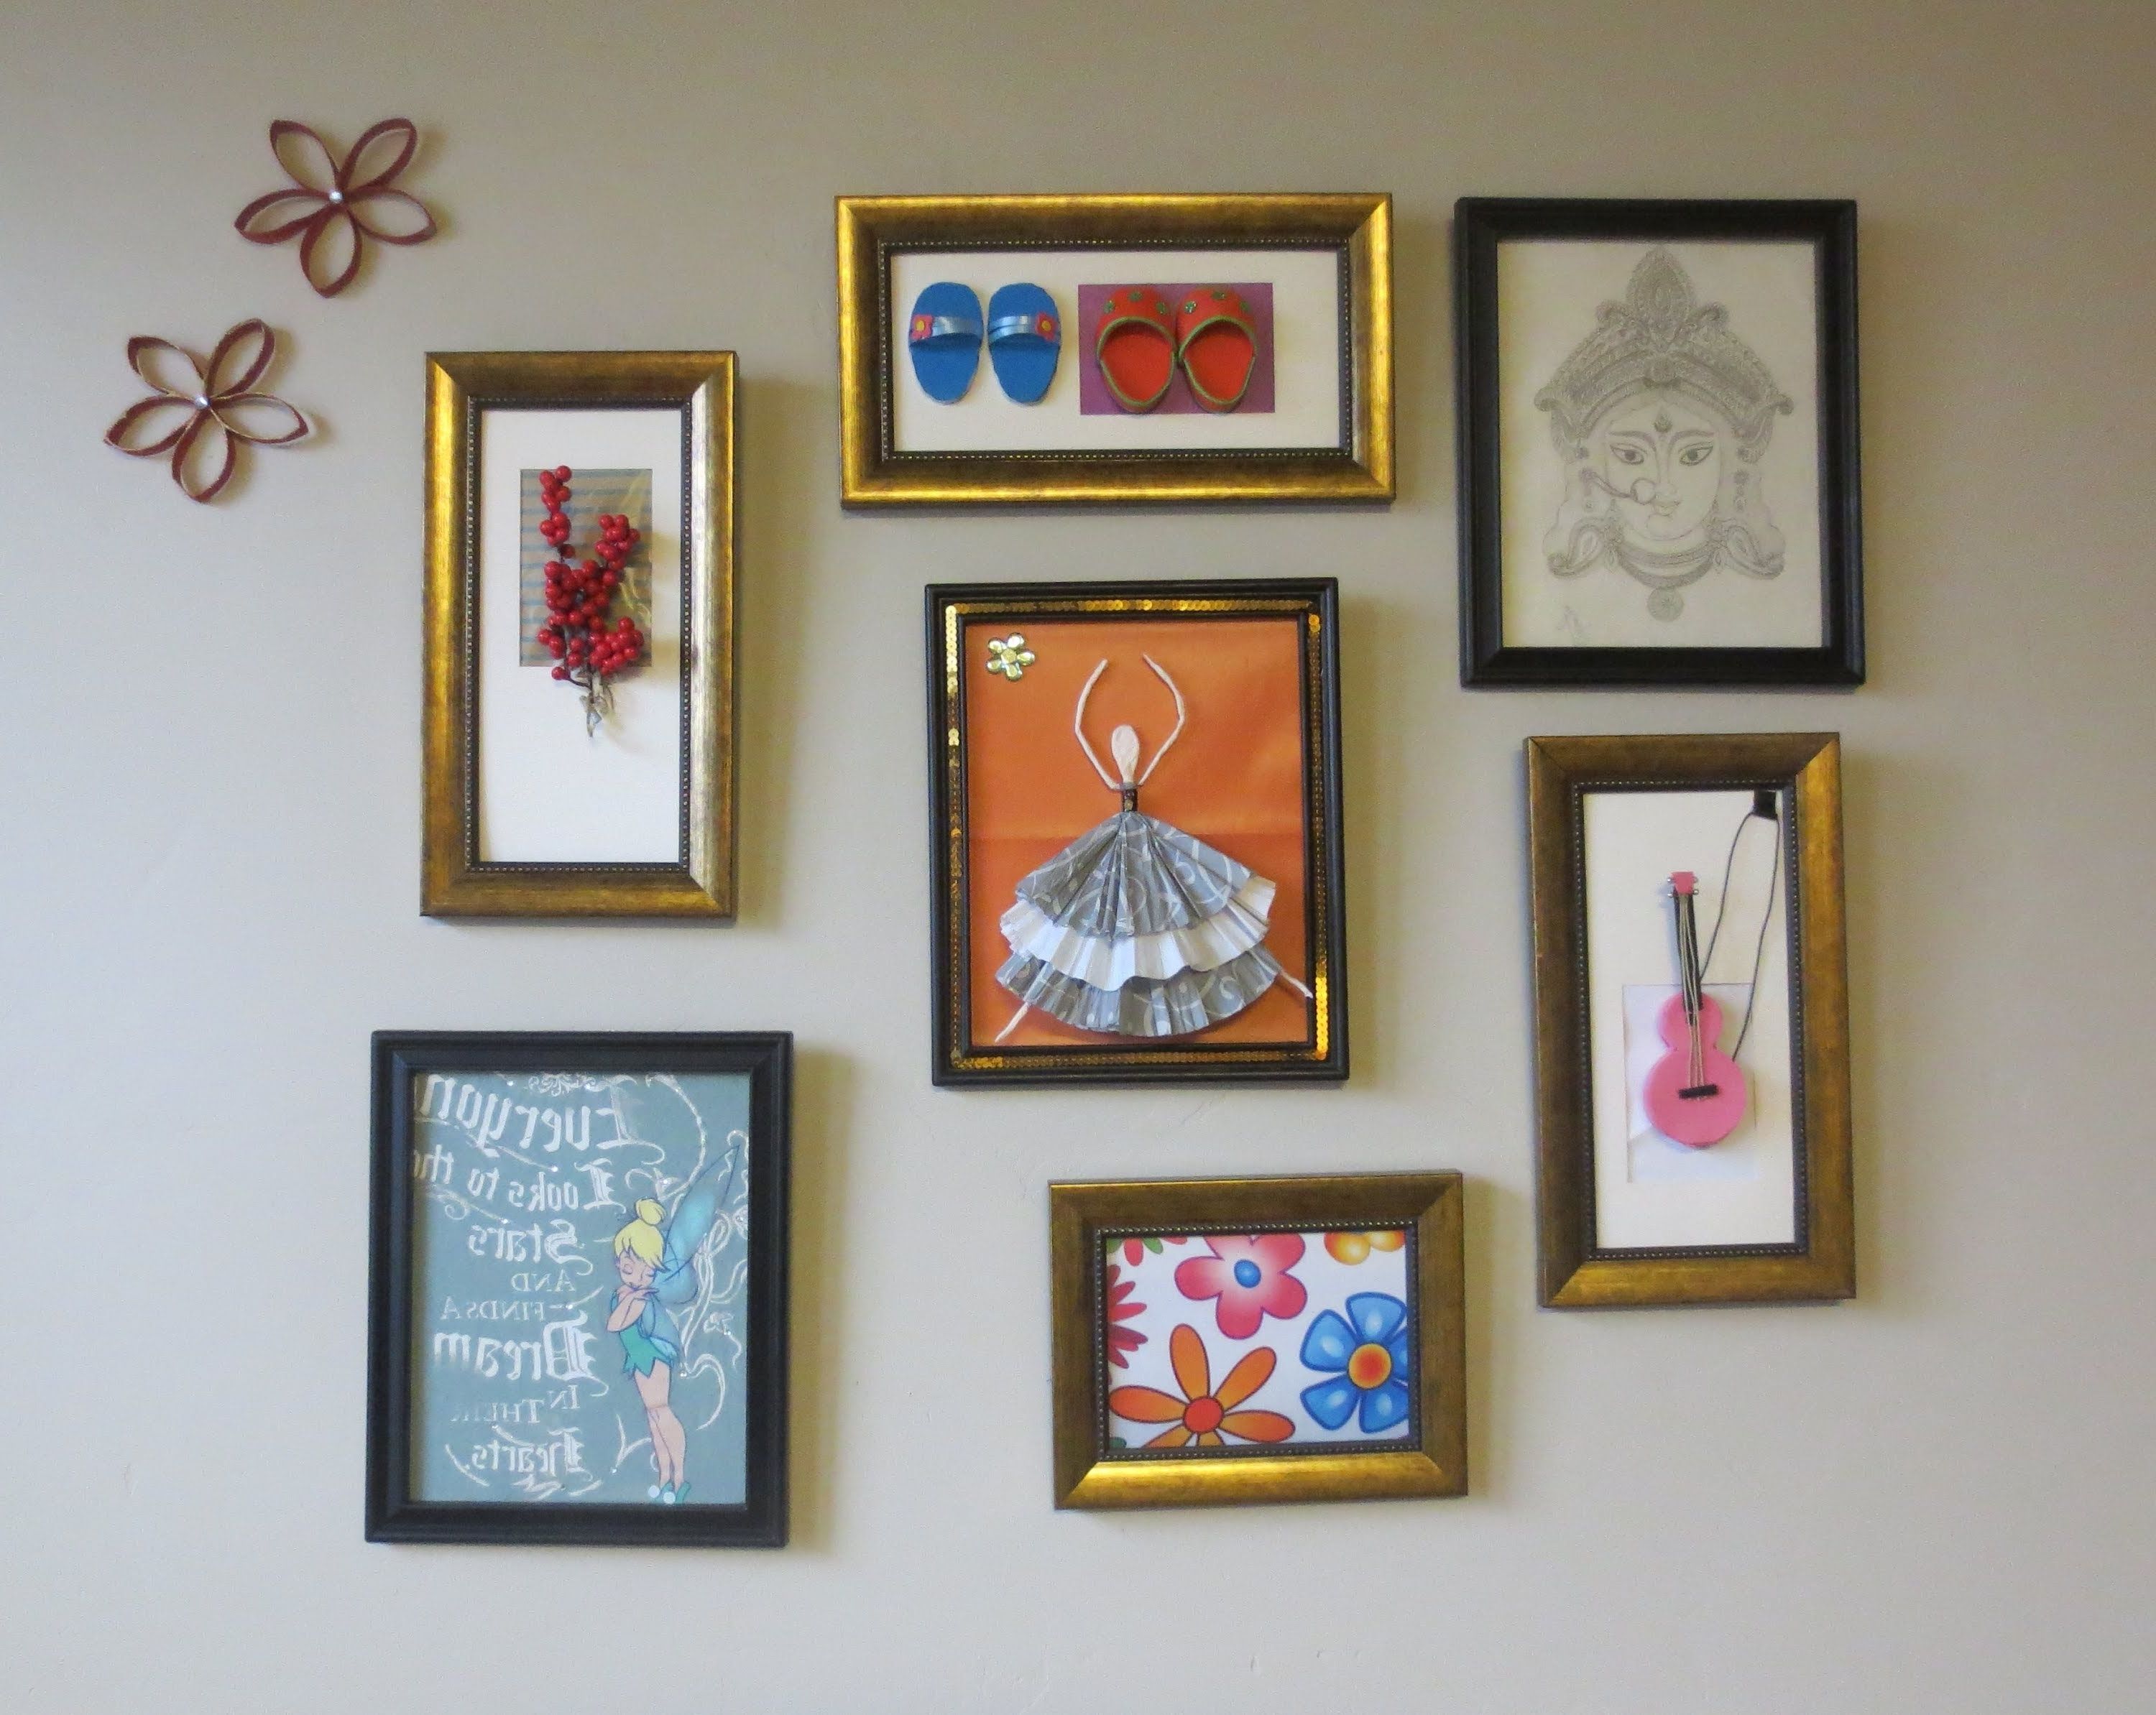 Framed 3d Wall Art In Fashionable Home Decor : Tshirt Graphic & 3d Wall Art Picture Frame Collage (View 1 of 15)